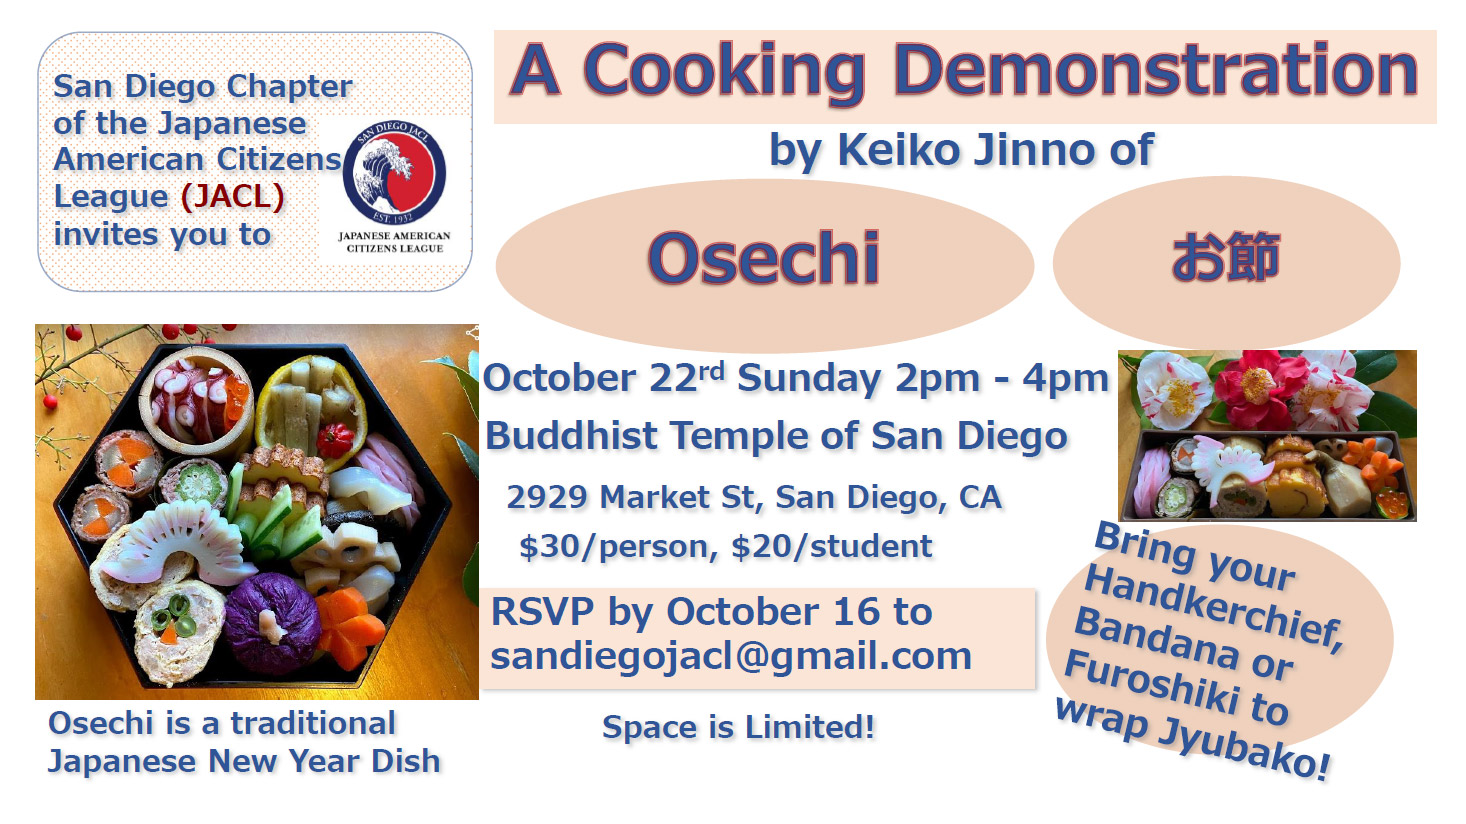 A Cooking Demonstration by Keiko Jinno